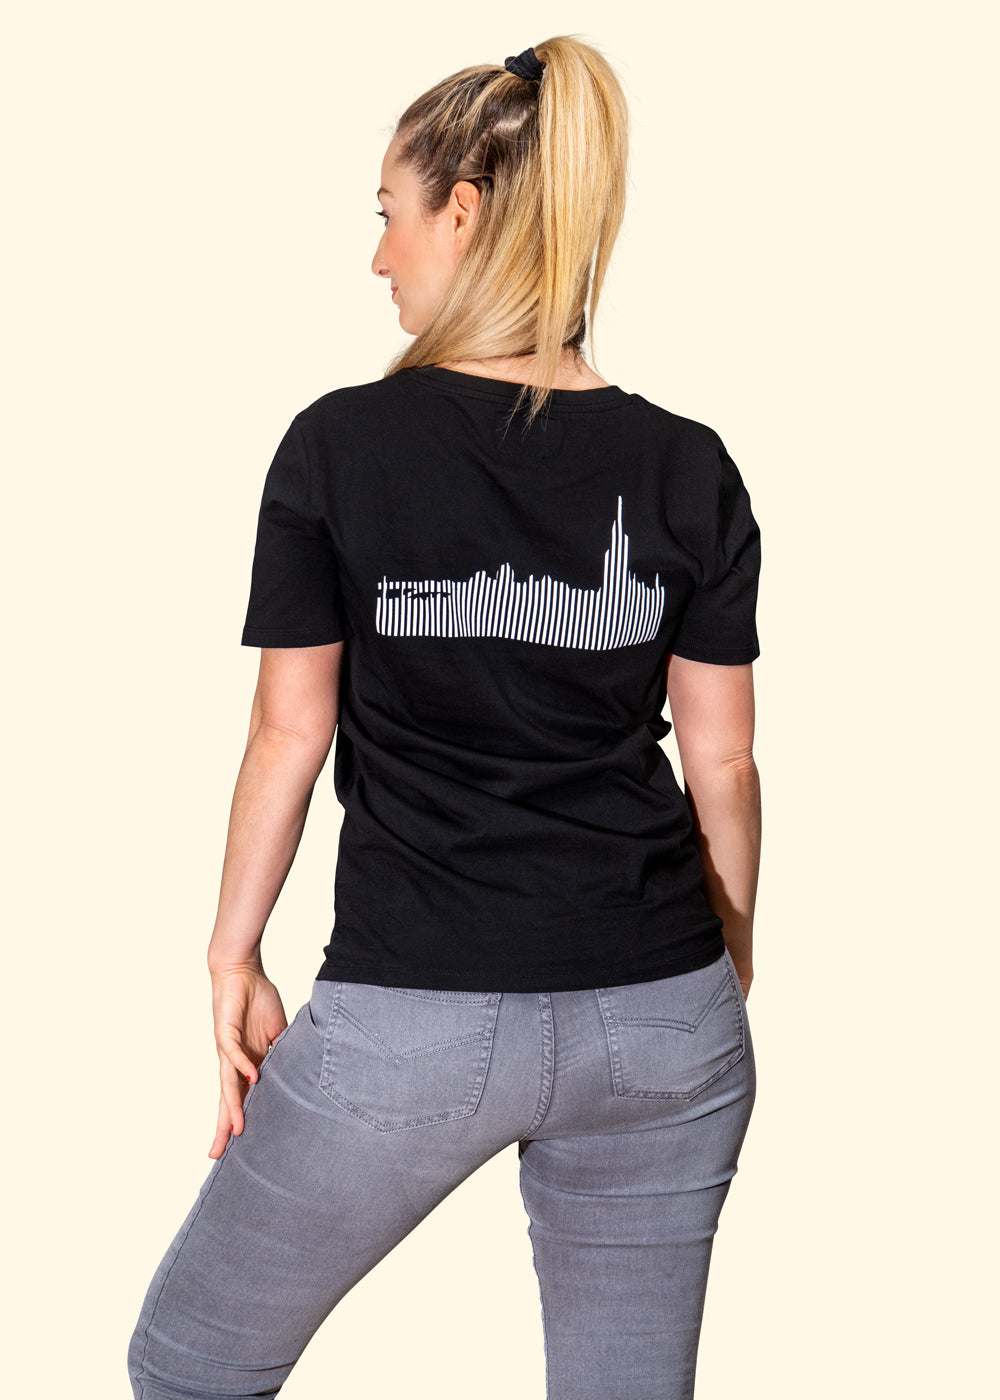 «Berner Skyline» tee - oldpassion - from prison with love